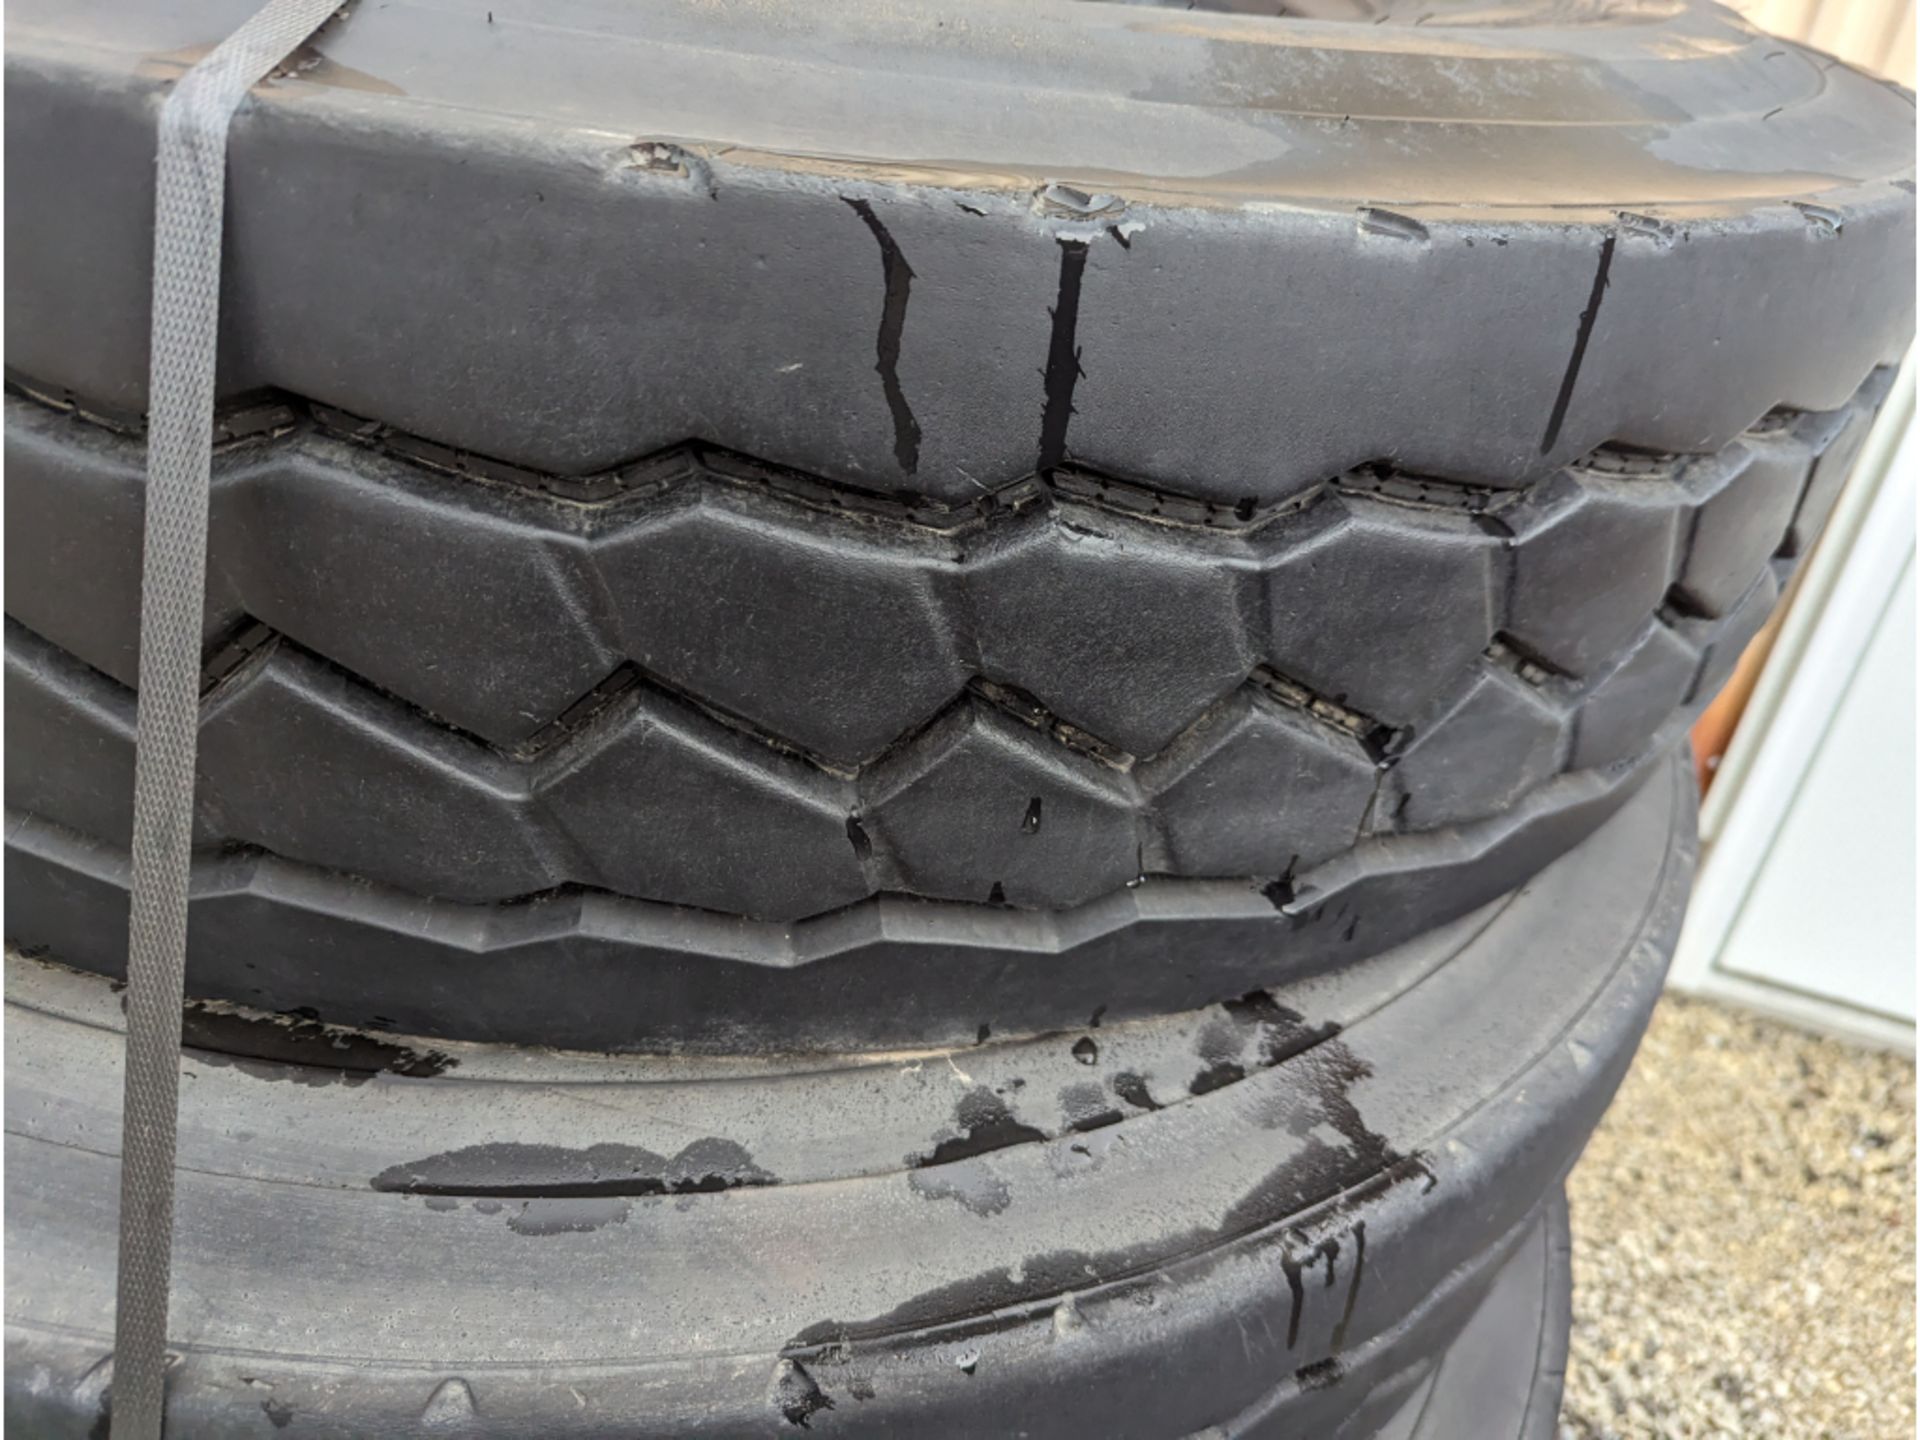 4 Goodyear G751 MSA 12R22.5 commercial truck tires USED Virgin Tread Surplus Take Off - Image 2 of 5